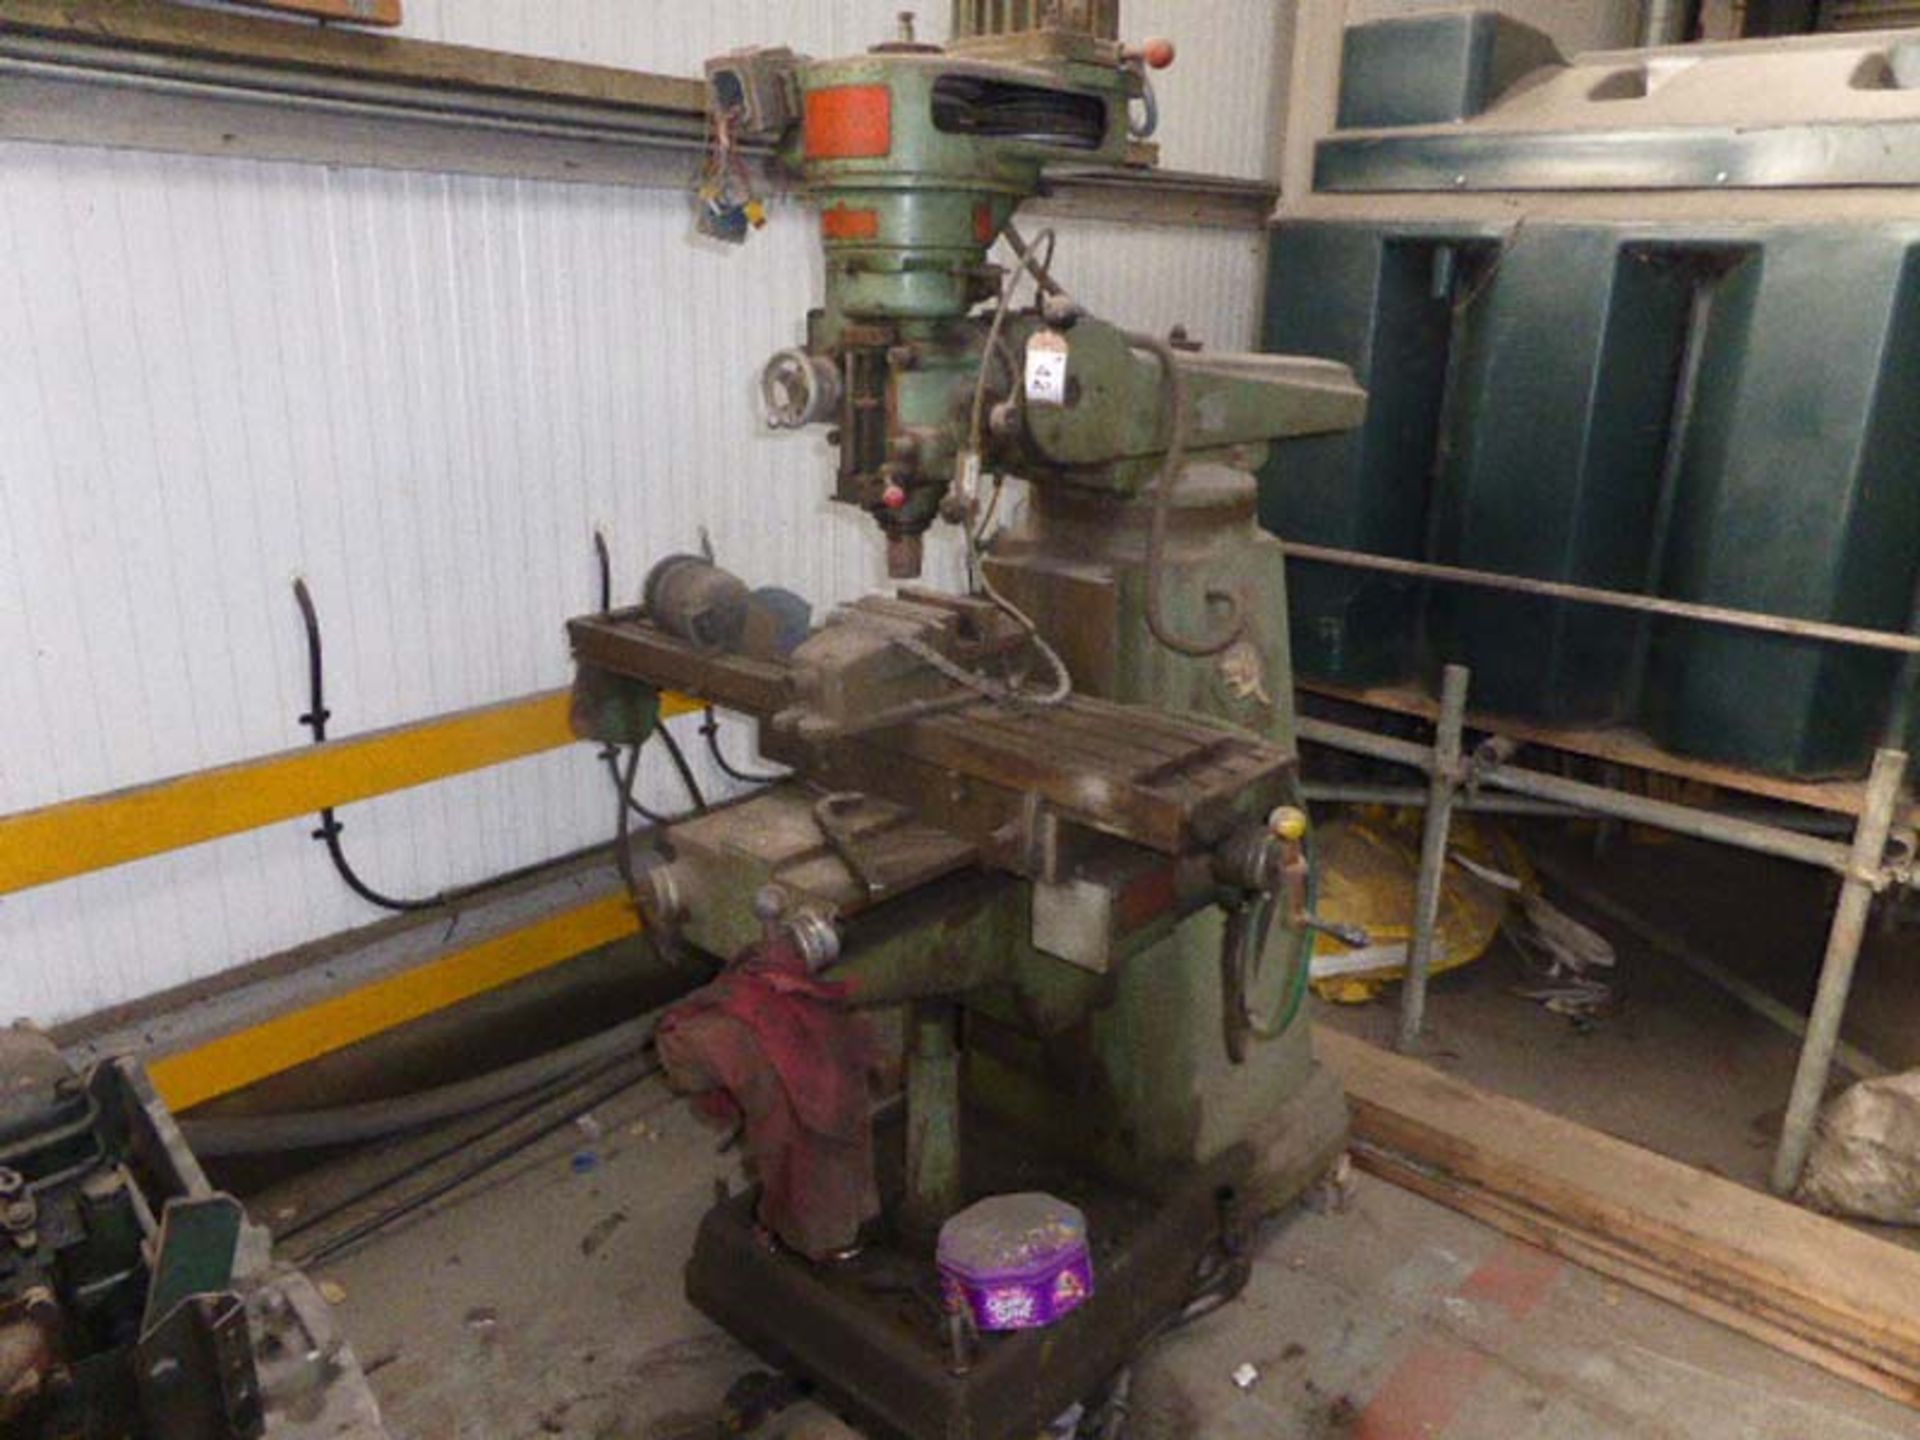 Beaver model VBRP universal milling machine with cabinet of accessories and tooling. s/n 729